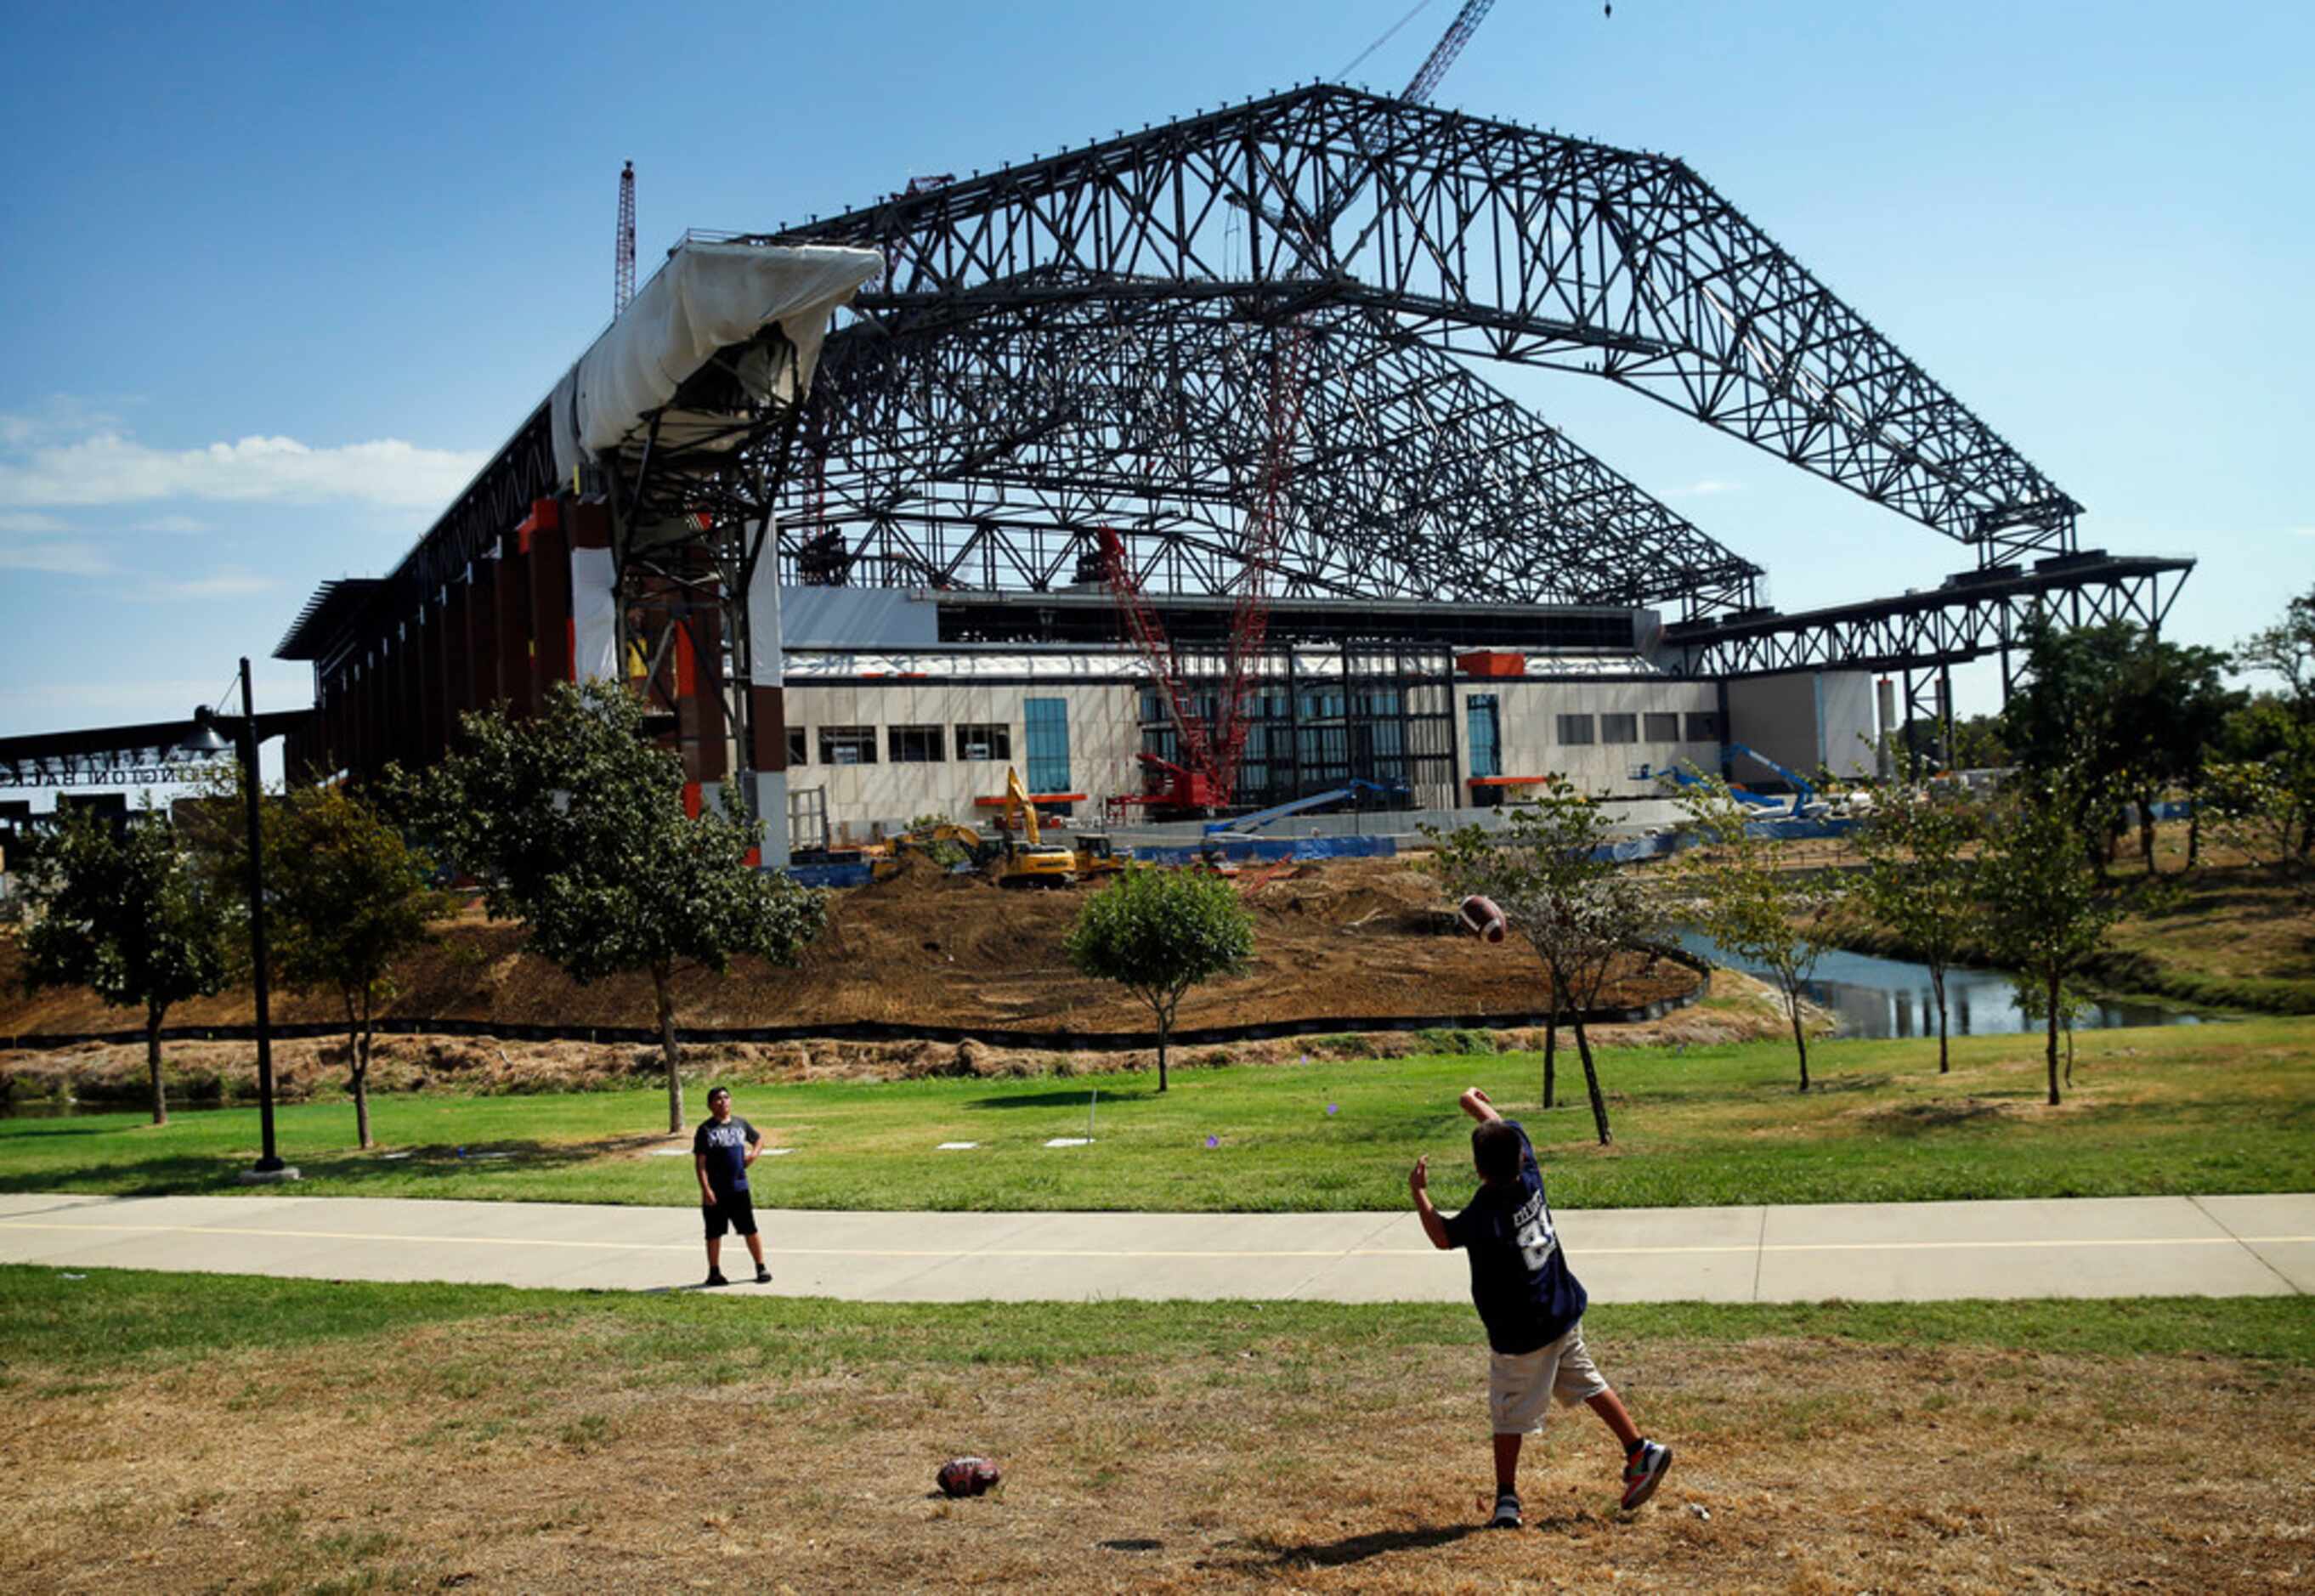 Young Dallas Cowboys fans toss a football before the new Globe Life Field under construction...